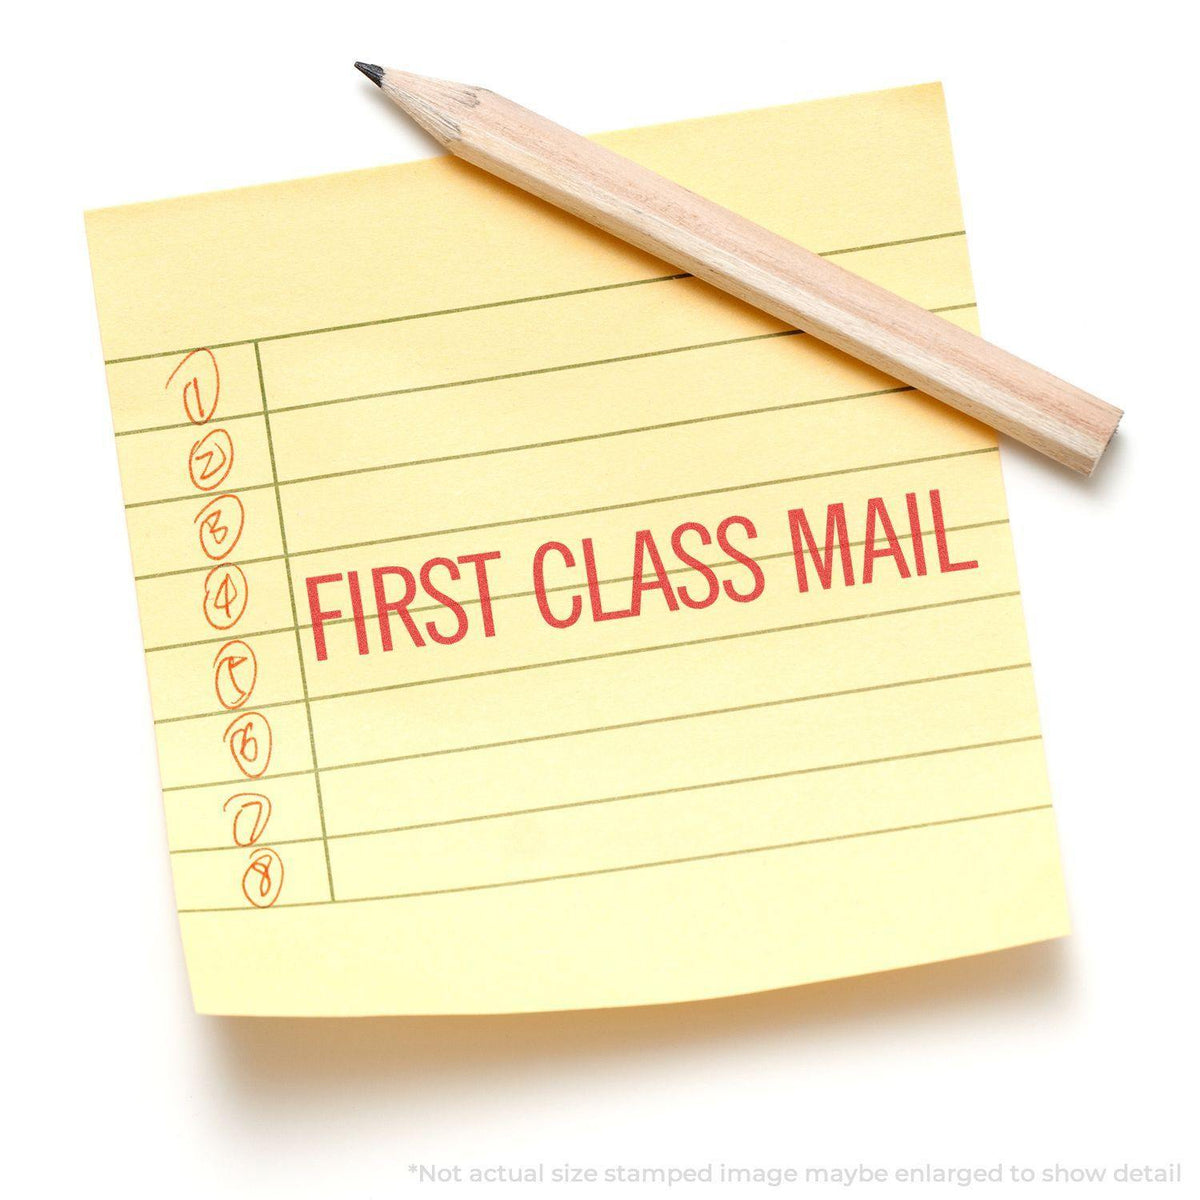 In Use Photo of Jumbo Large Red First Class Mail Xstamper Stamp